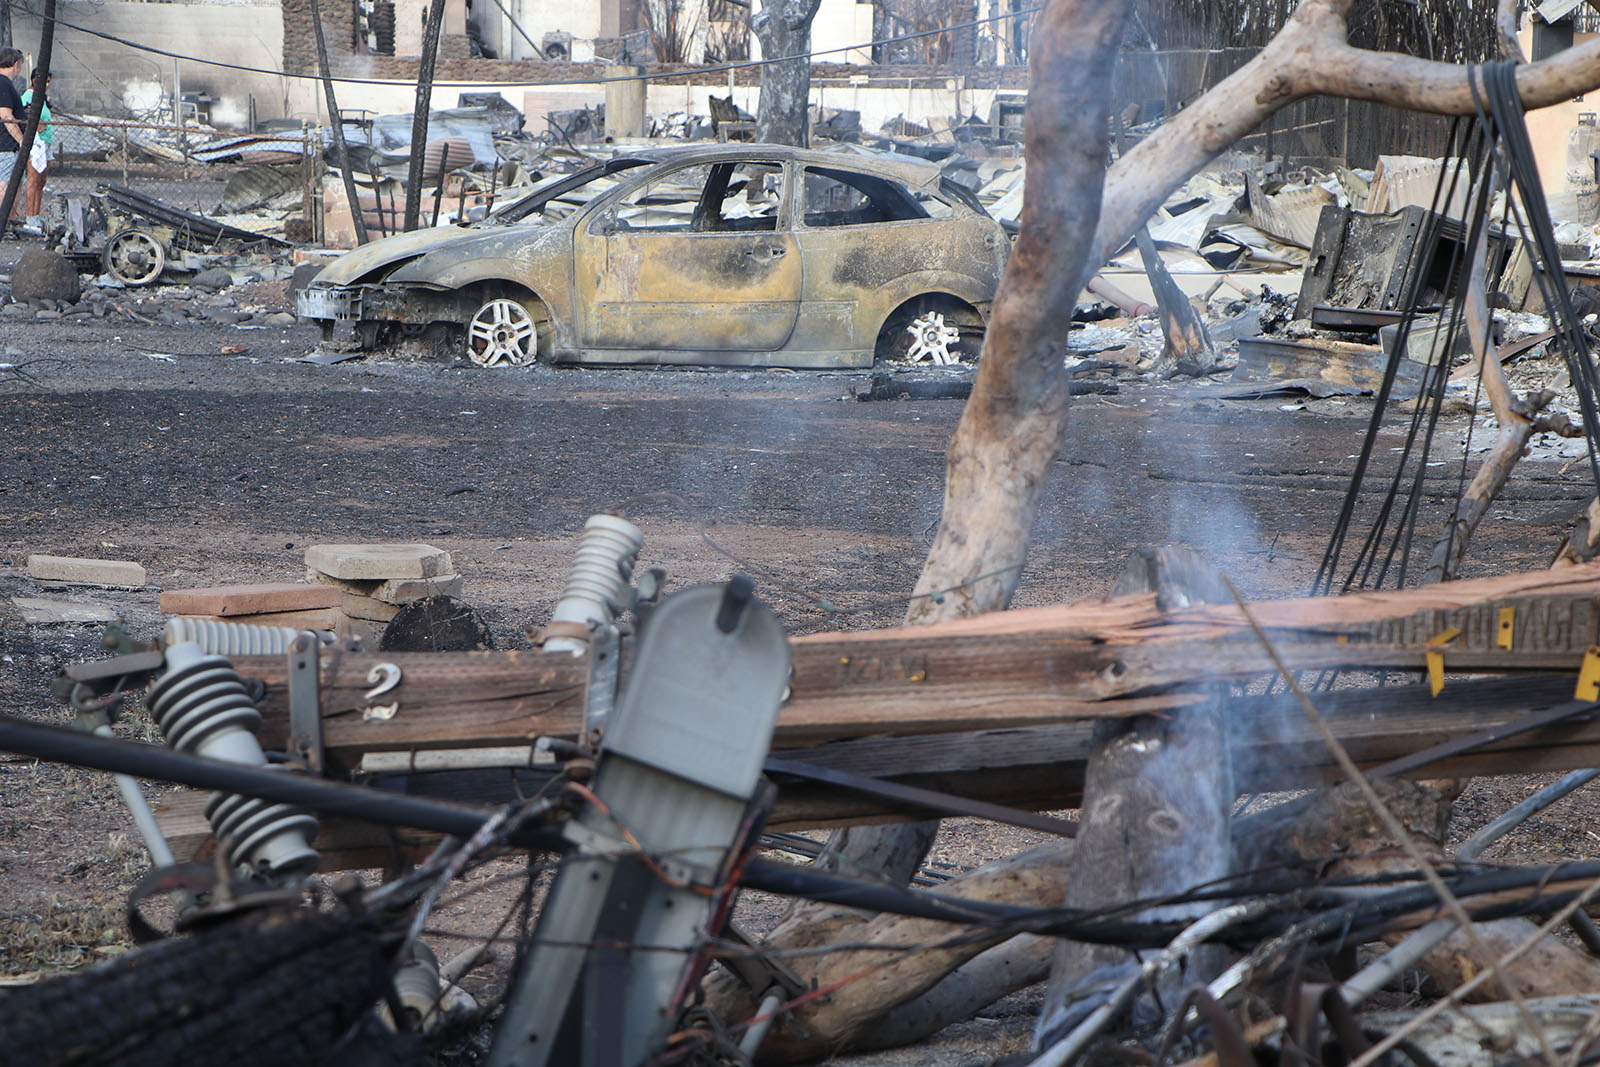 A burnt car surrounded by gnarled metal after the wildfires.